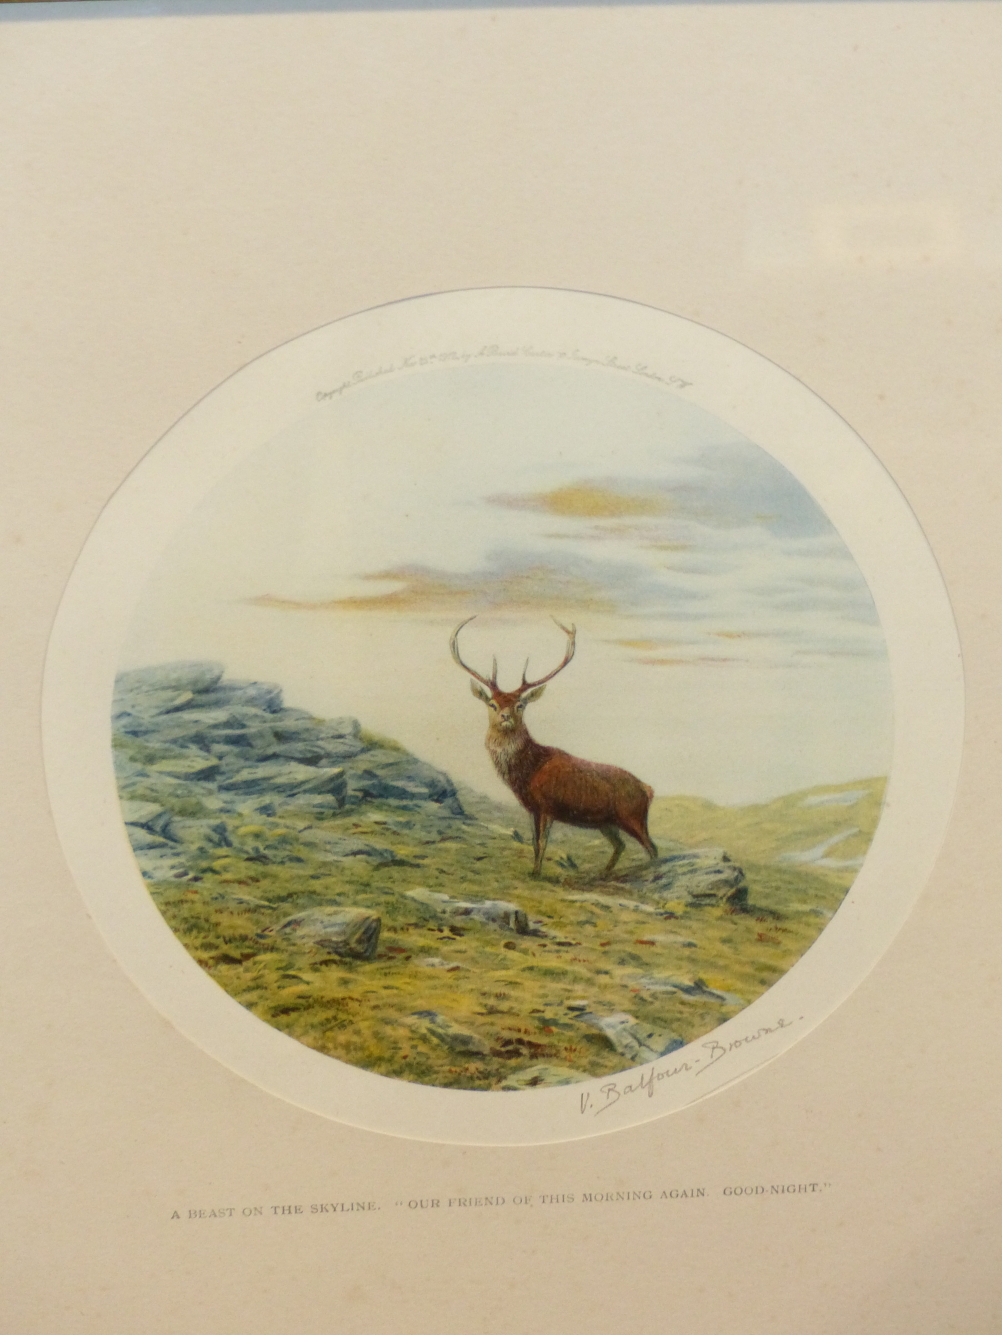 AFTER V.BALFOUR-BROWNIE. (1880-1963) SEVEN COLOUR PRINTS OF DEER IN THE HIGHLANDS, EACH PENCIL - Image 5 of 8